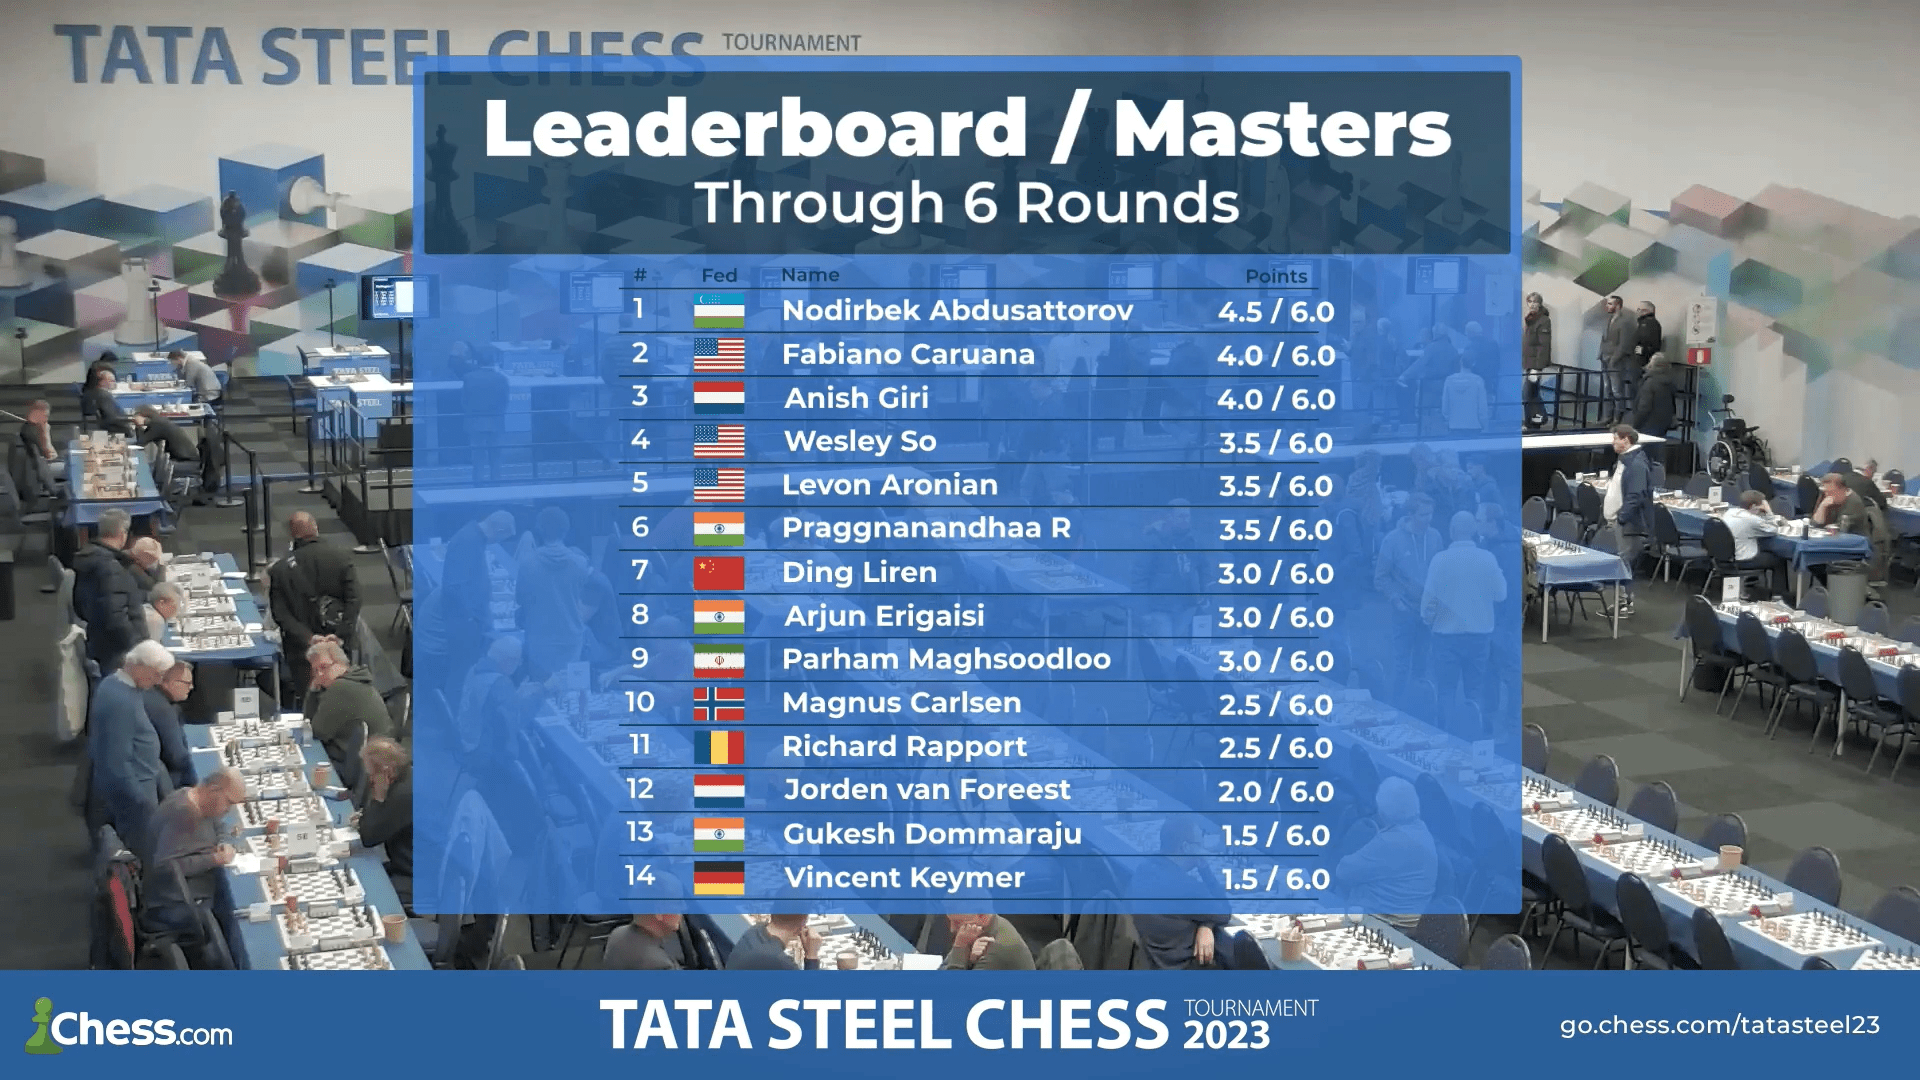 Abdusattorov leads the Tata Steel Masters with 6/8 going into the